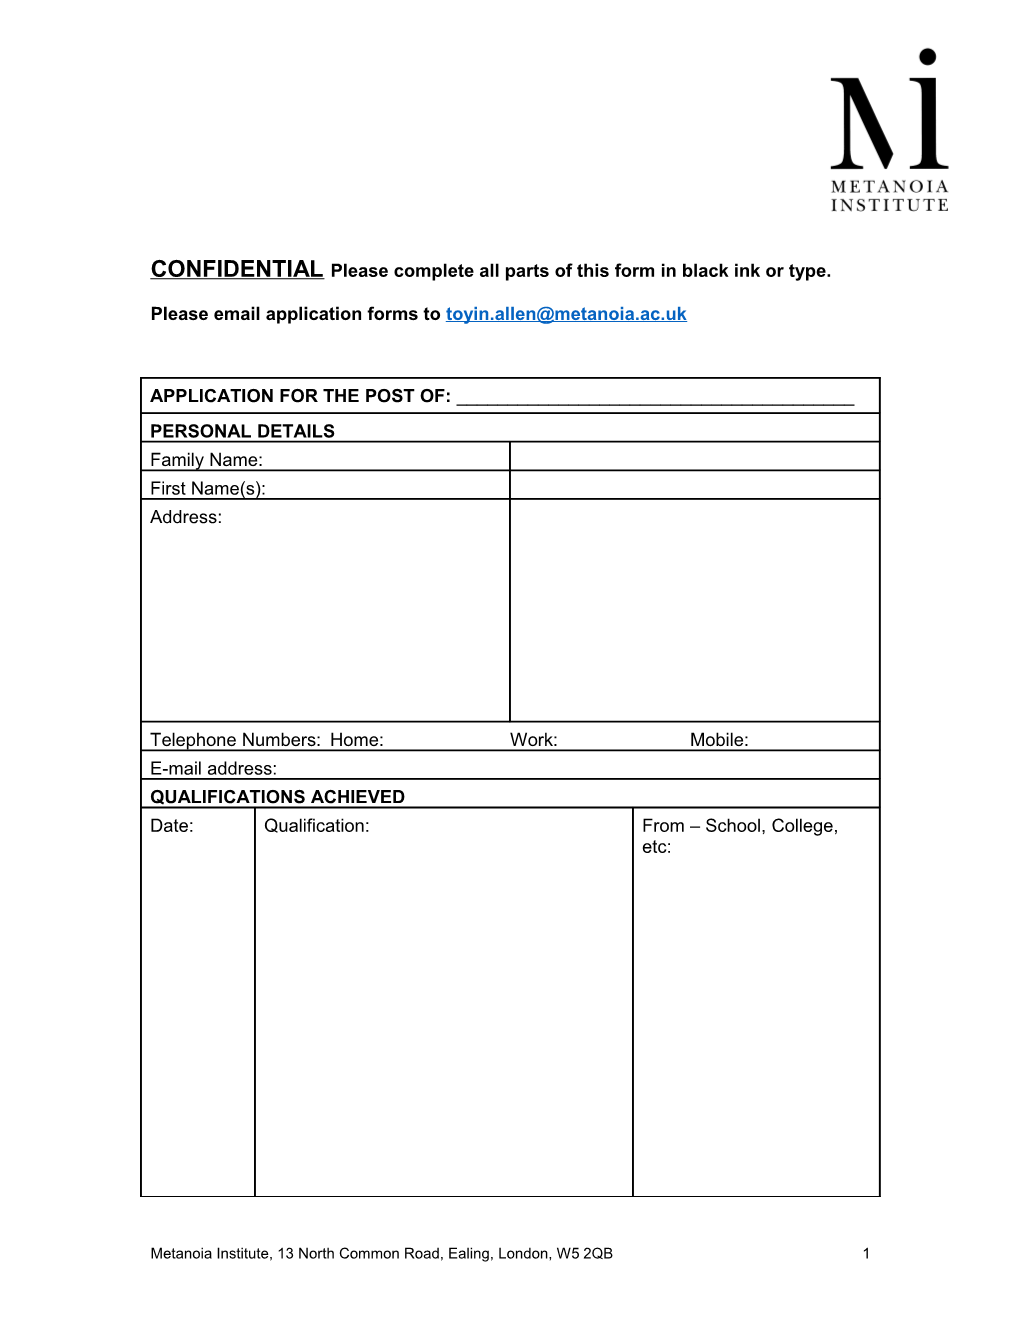 CONFIDENTIAL Please Complete All Parts of This Form in Black Ink Or Type